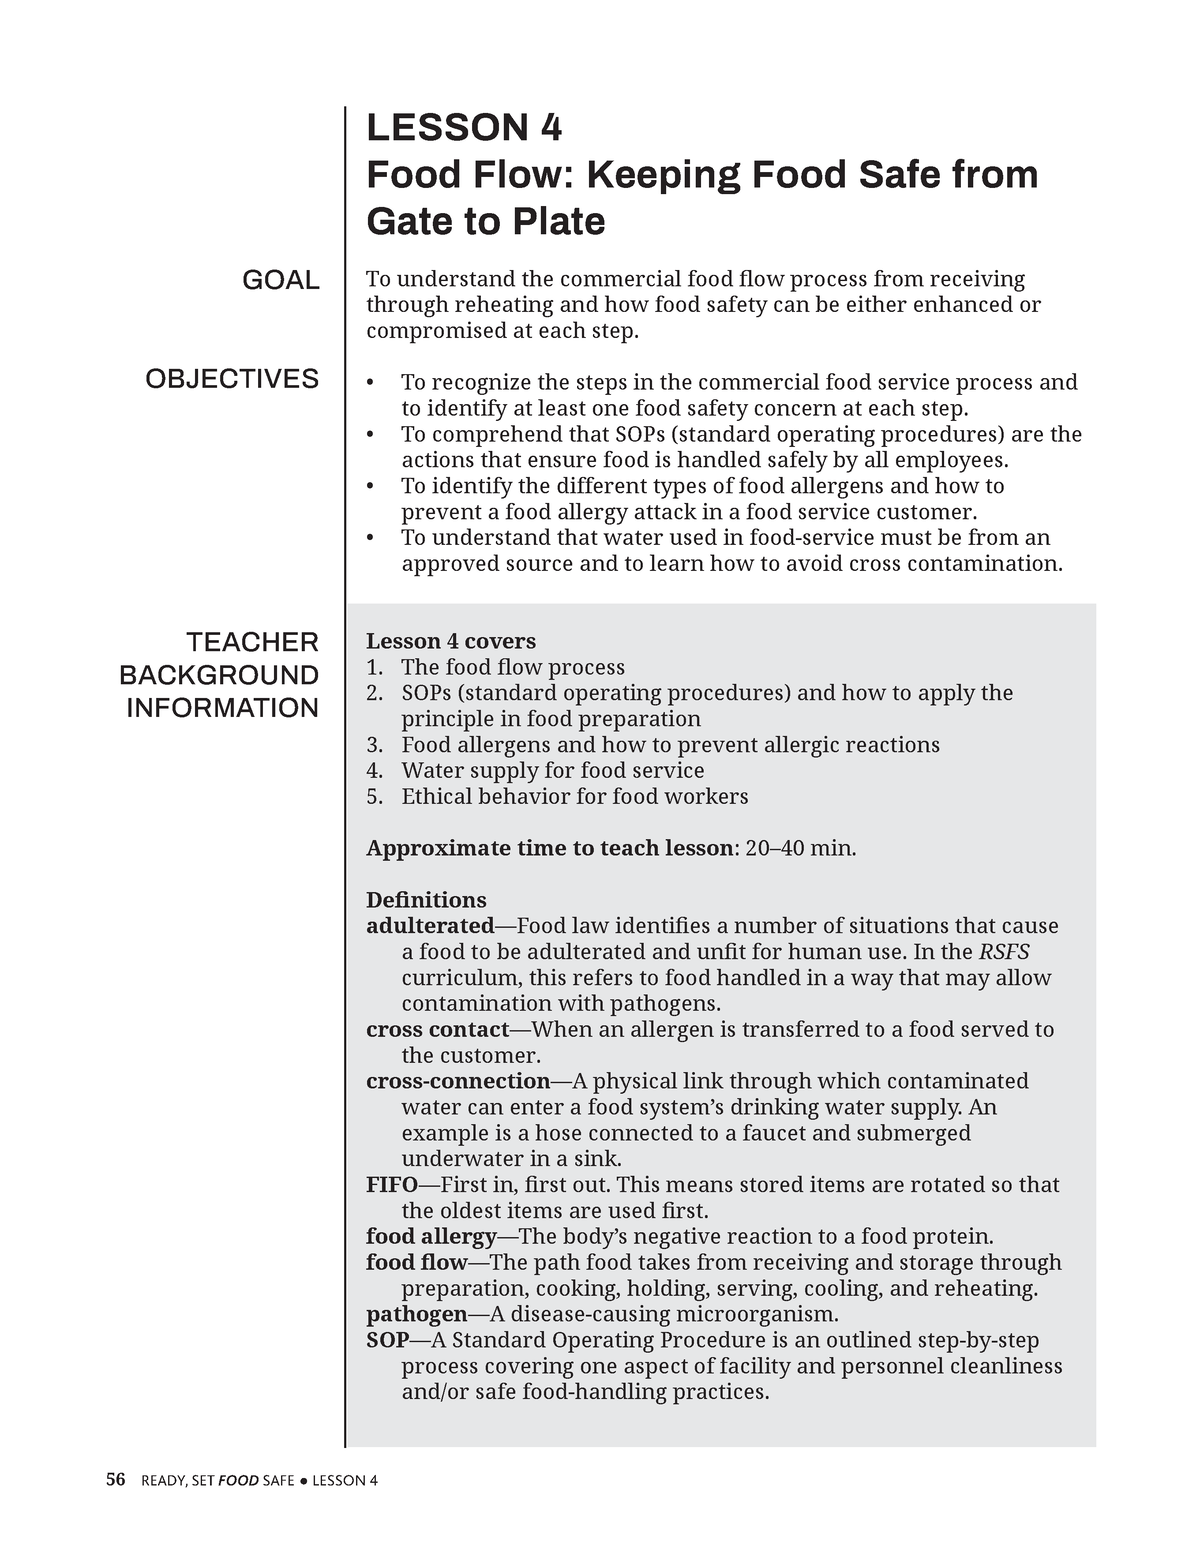 Food Flow - Food flow: from gate to plate - GOAL OBJECTIVES TEACHER ...